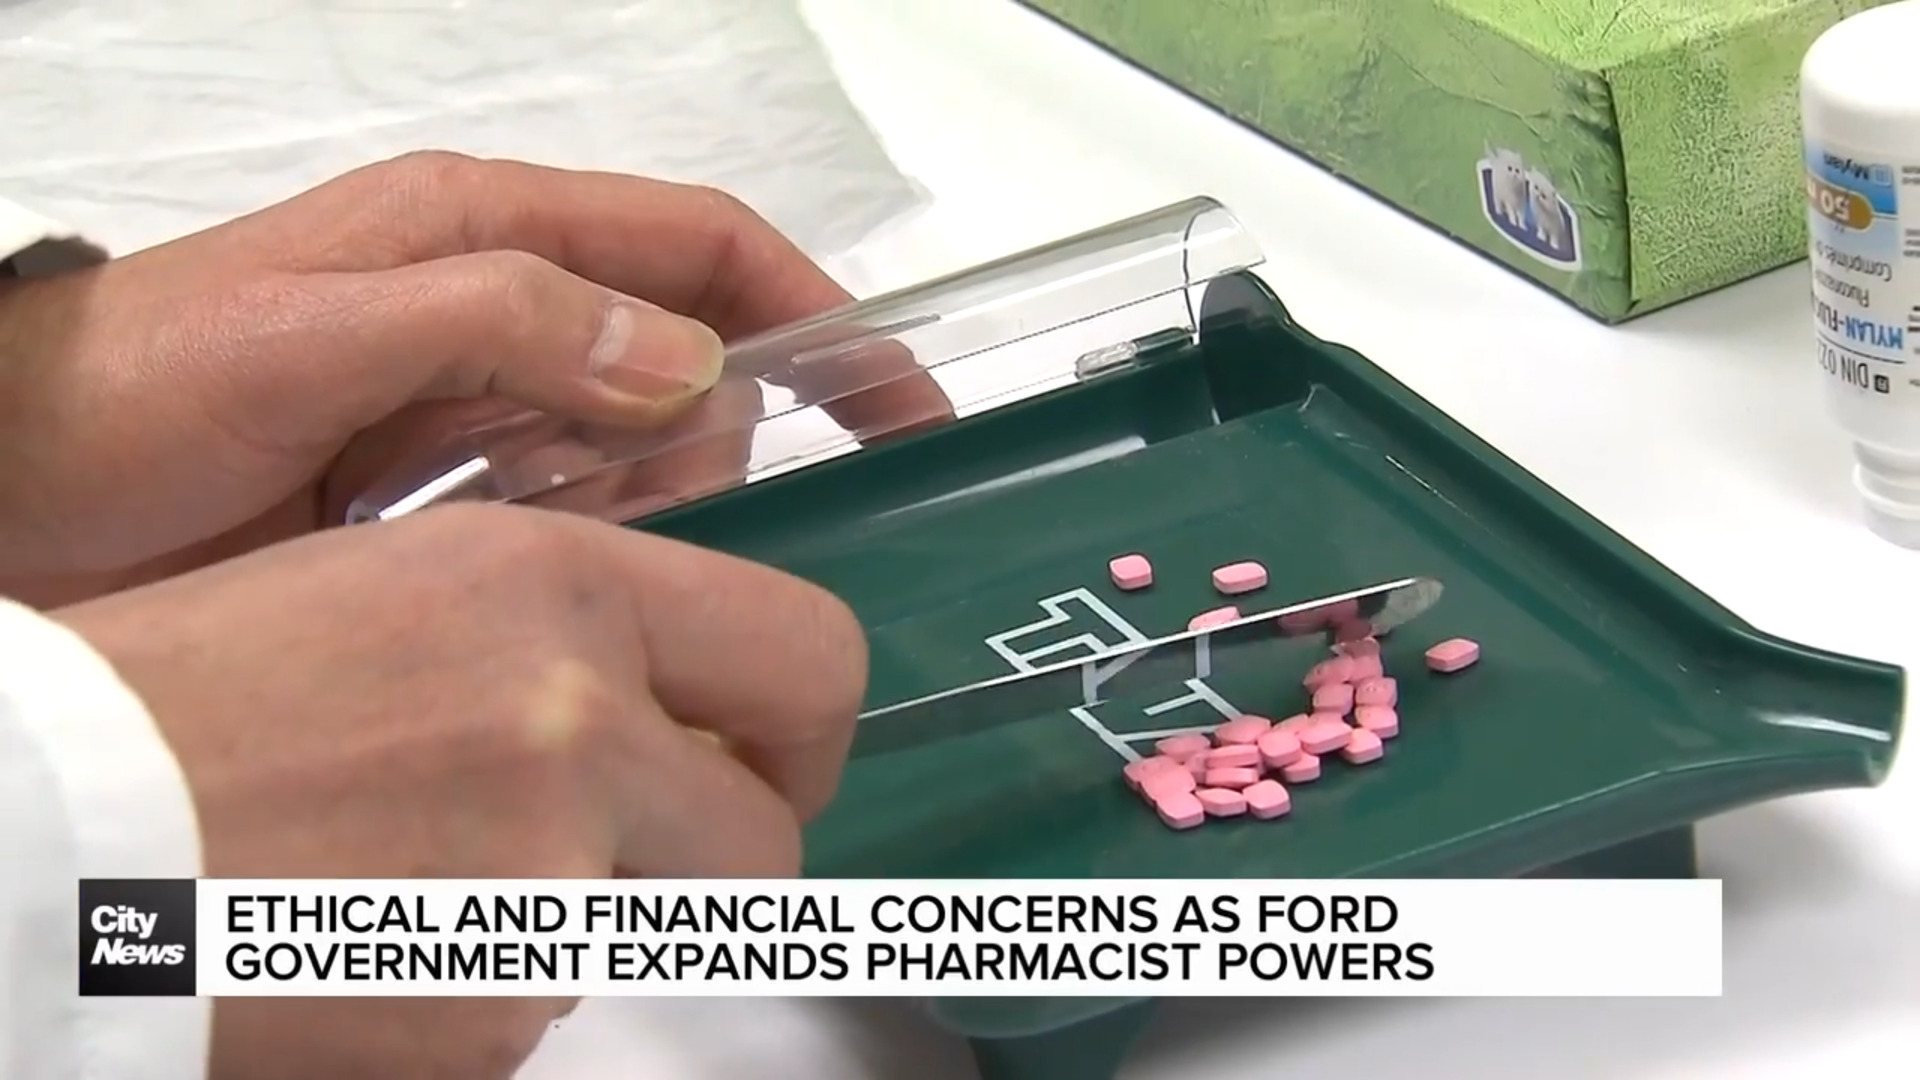 Ethical and financial concerns as Ford government expands pharmacist powers